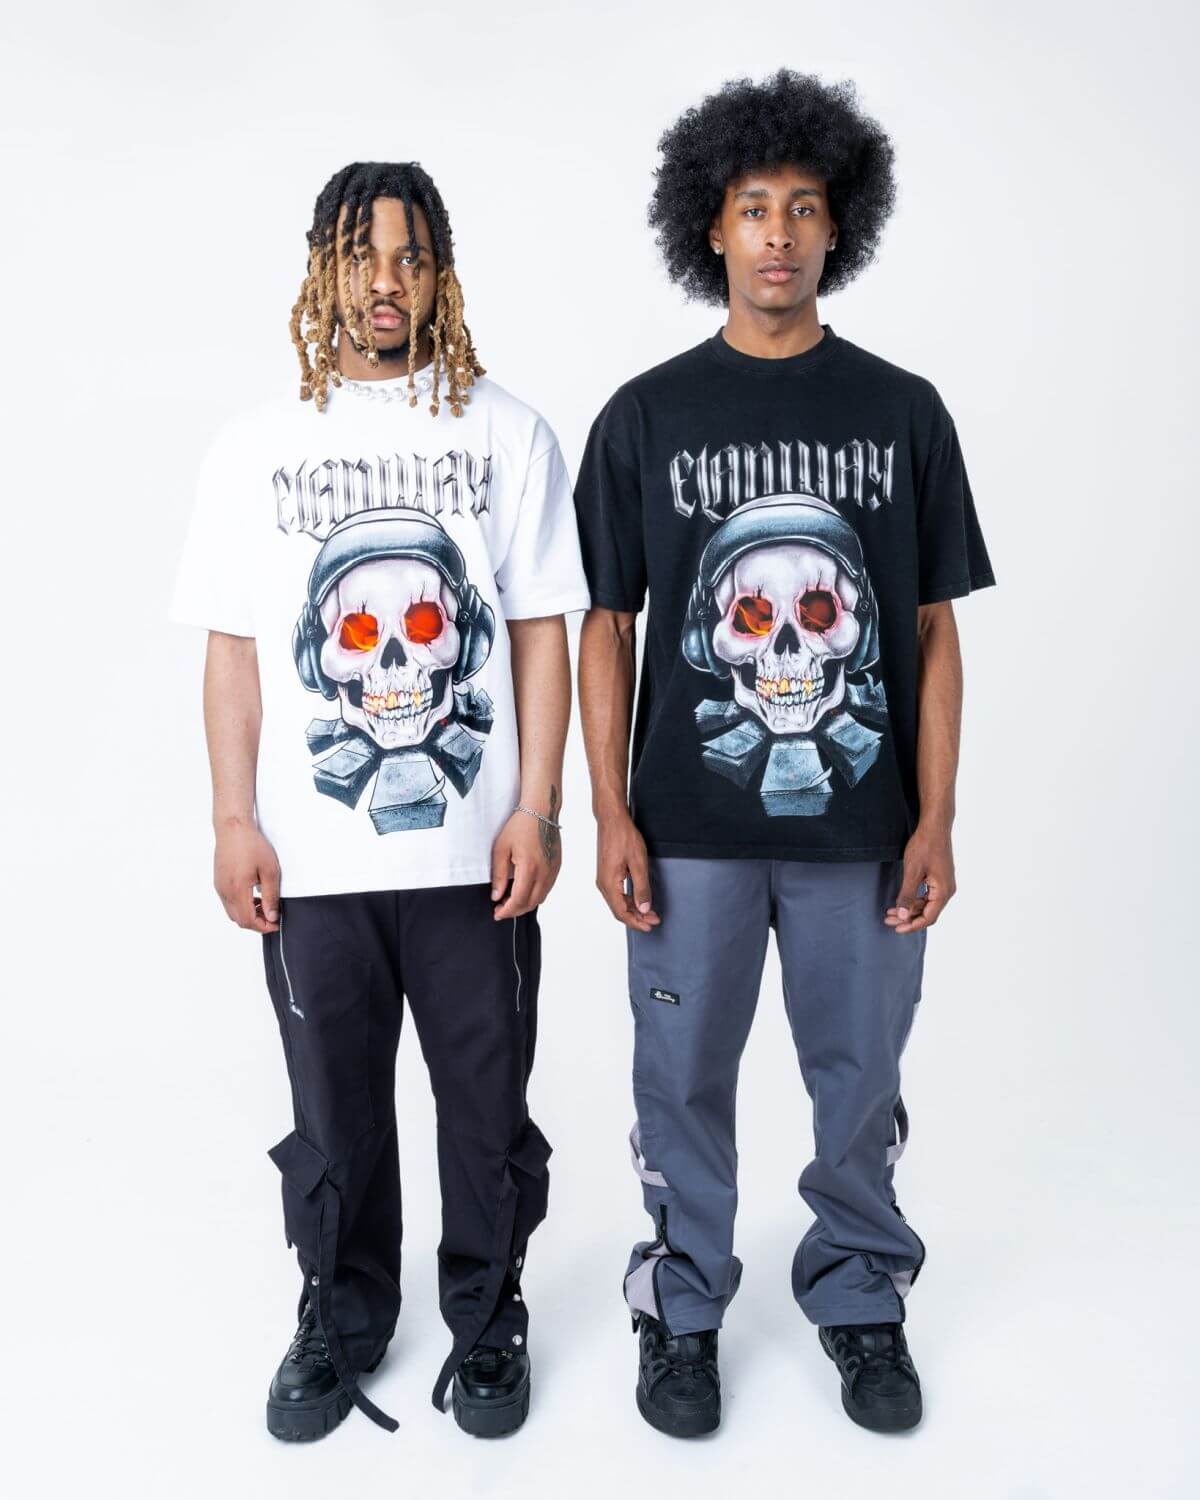 Elanway - Oversized T-Shirt With Skull Print